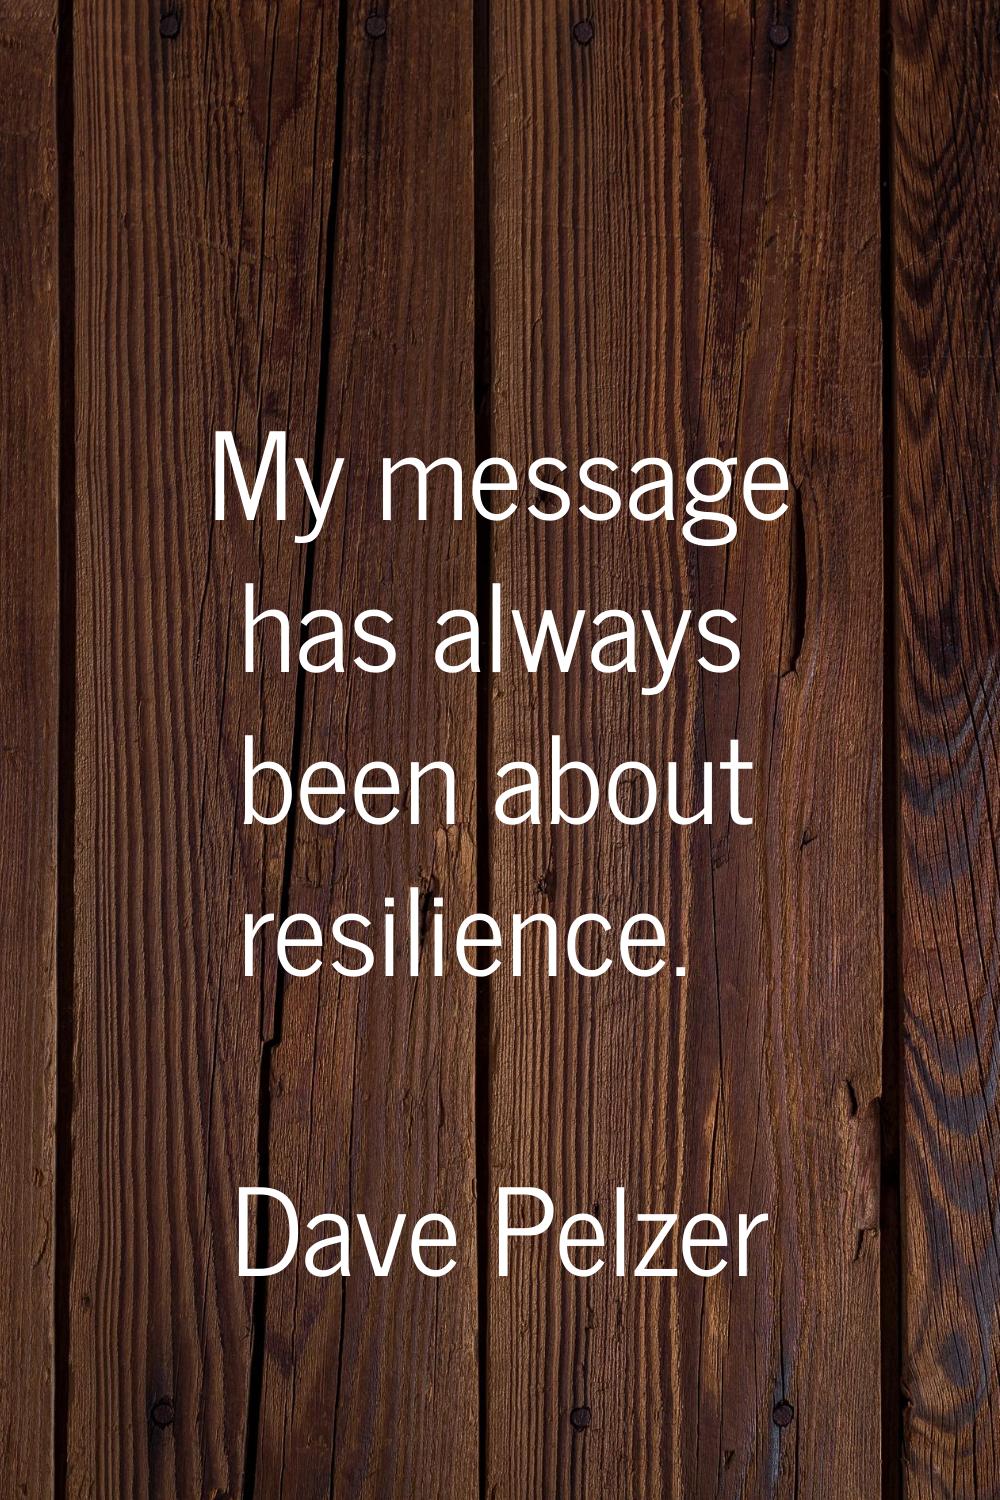 My message has always been about resilience.